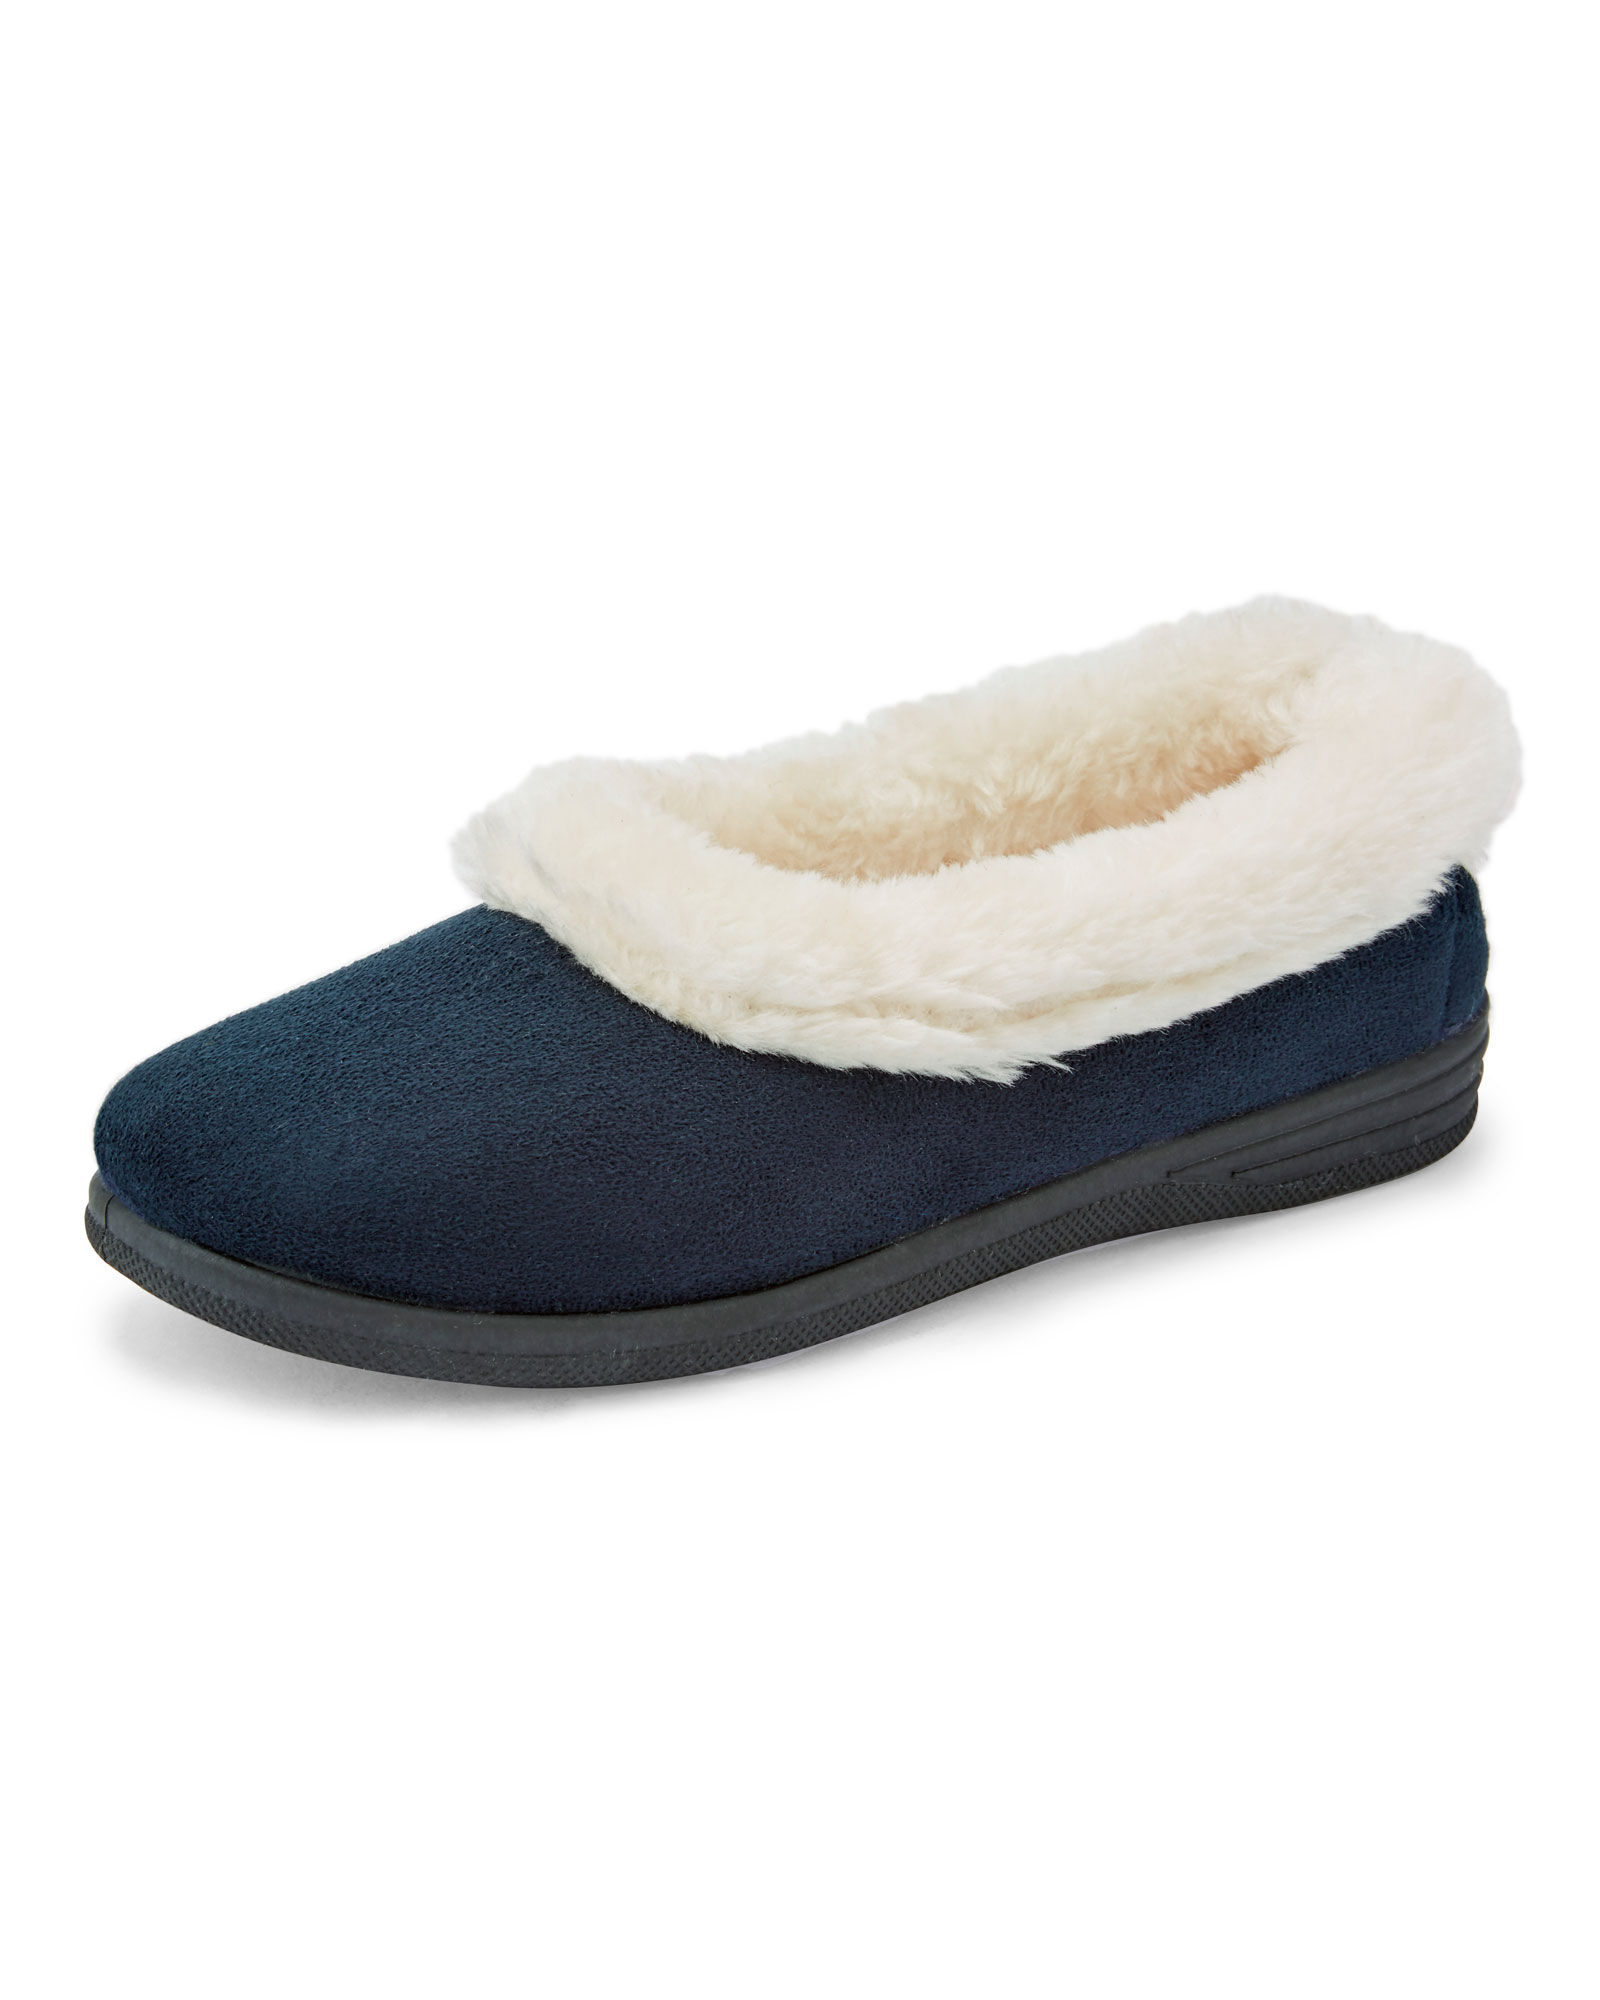 Classic Slippers at Cotton Traders